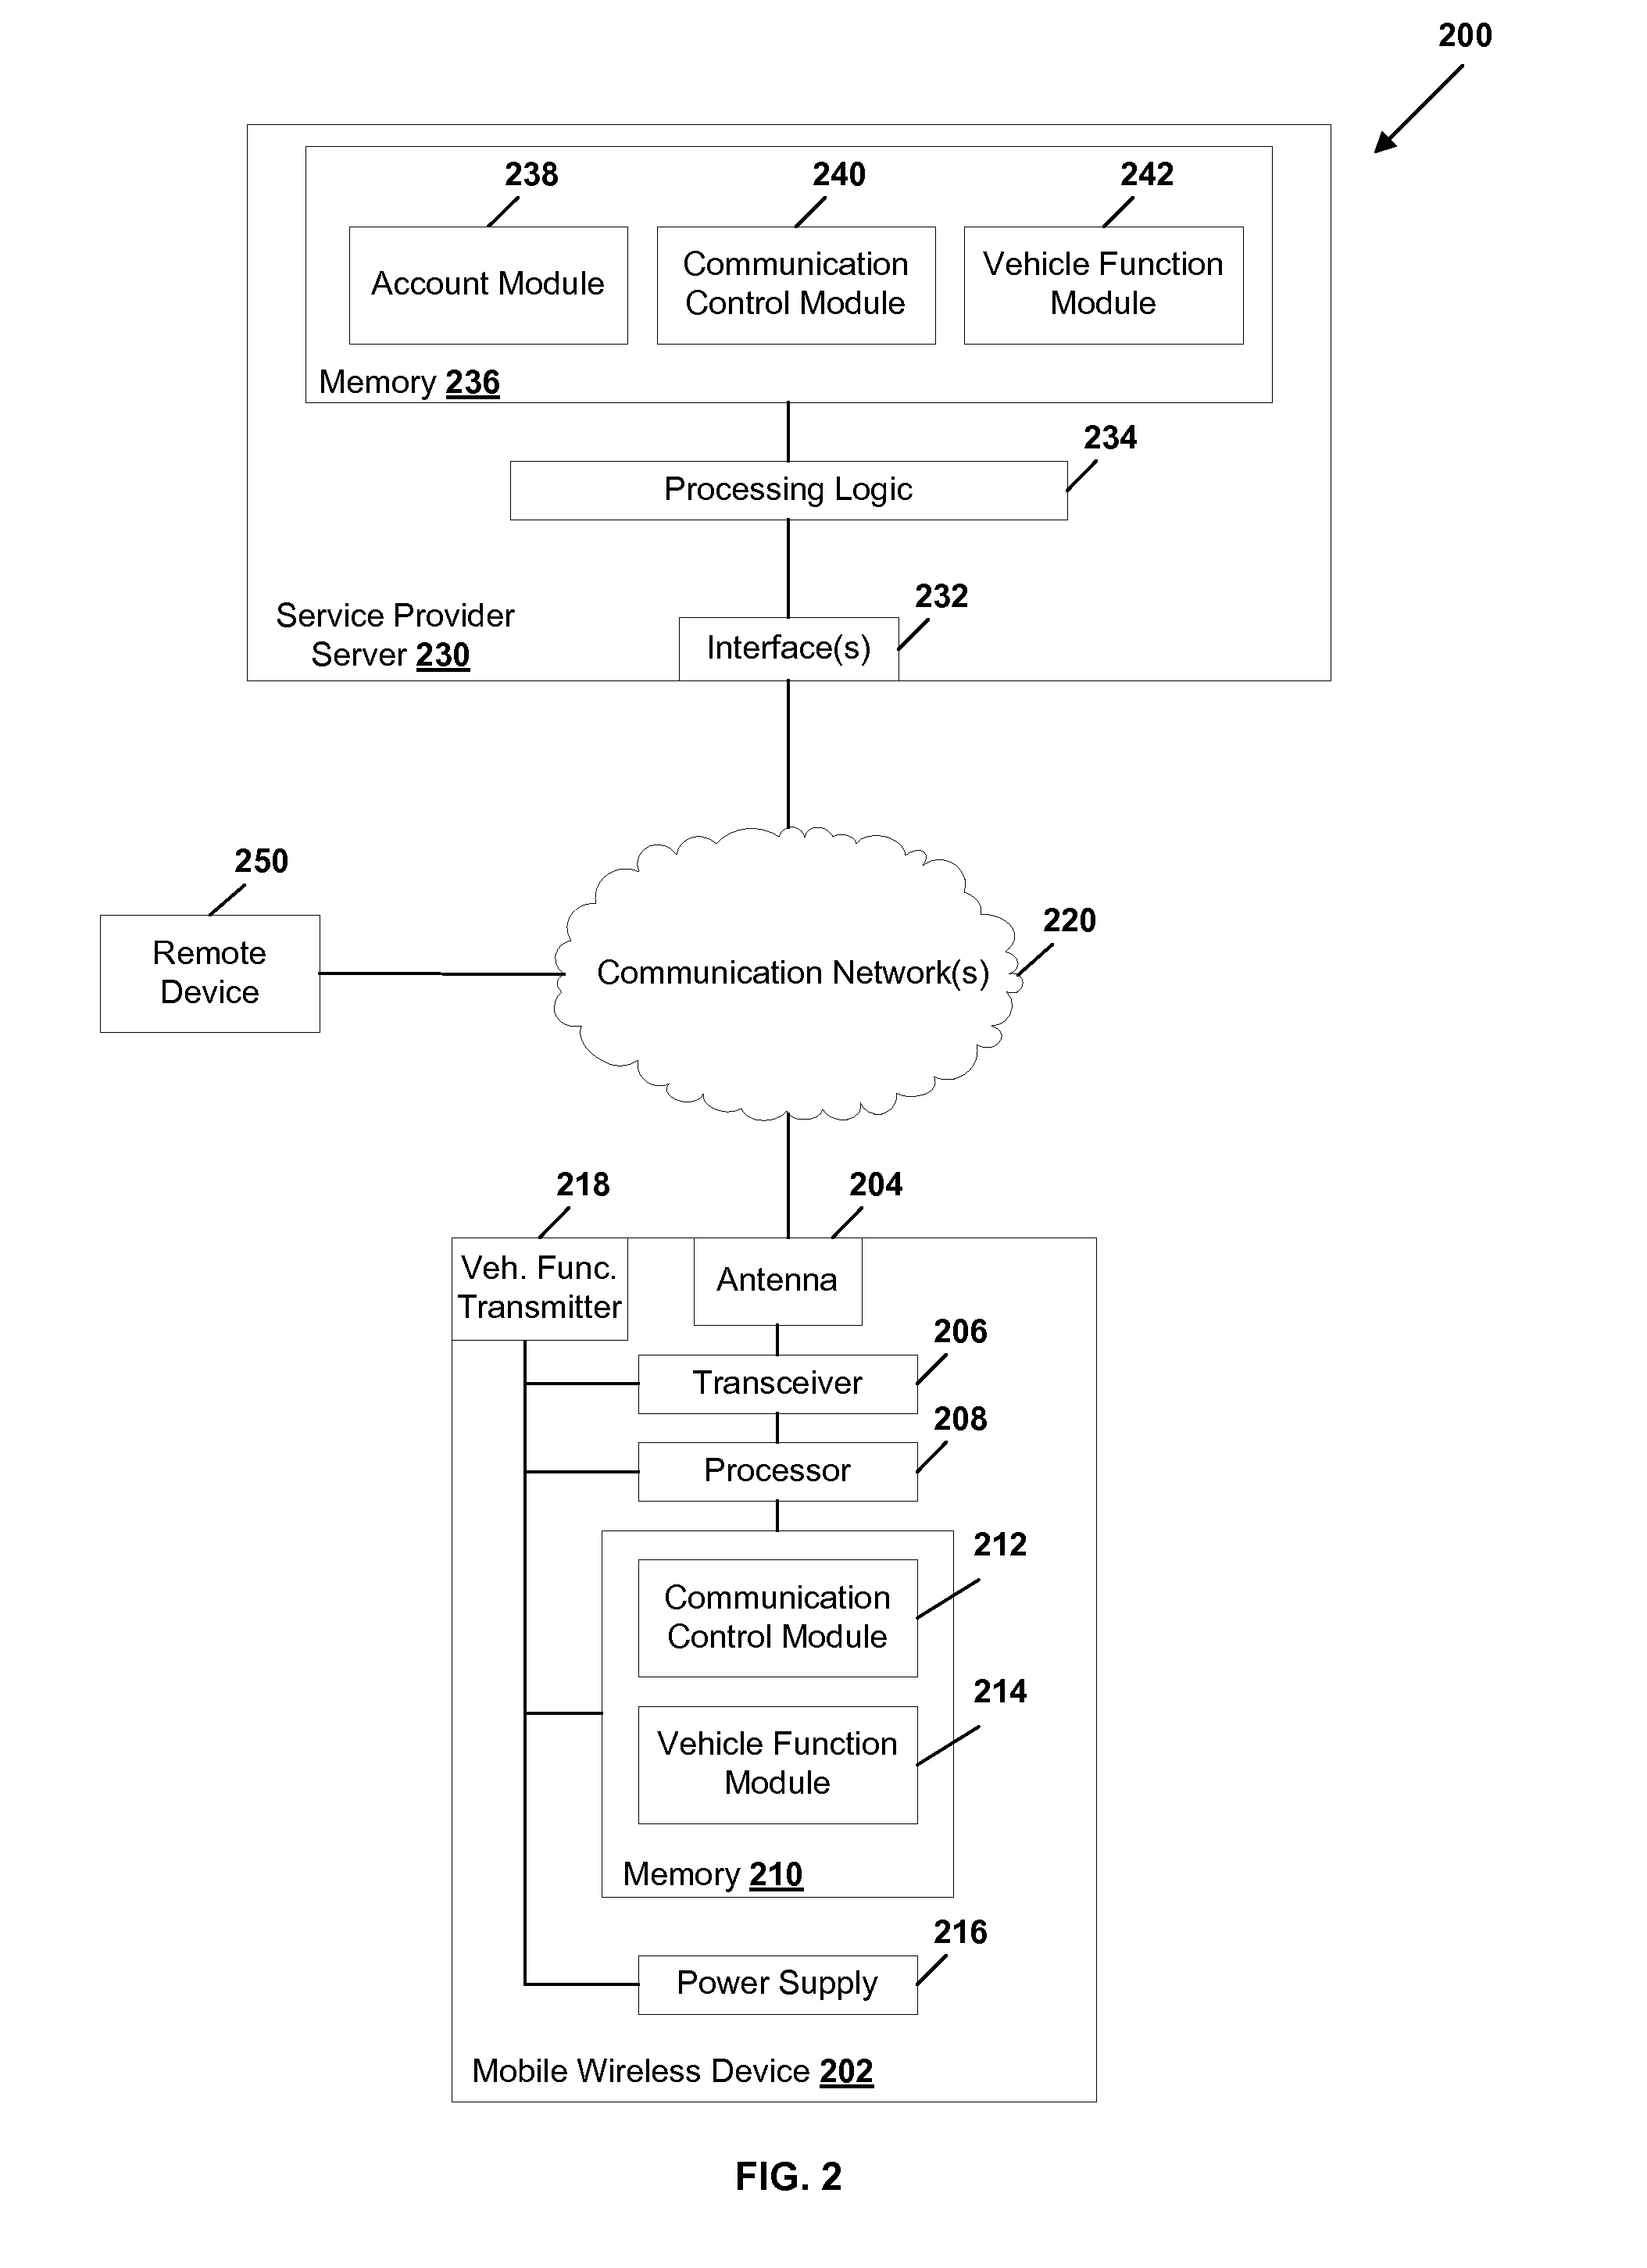 System and method of controlling vehicle functions